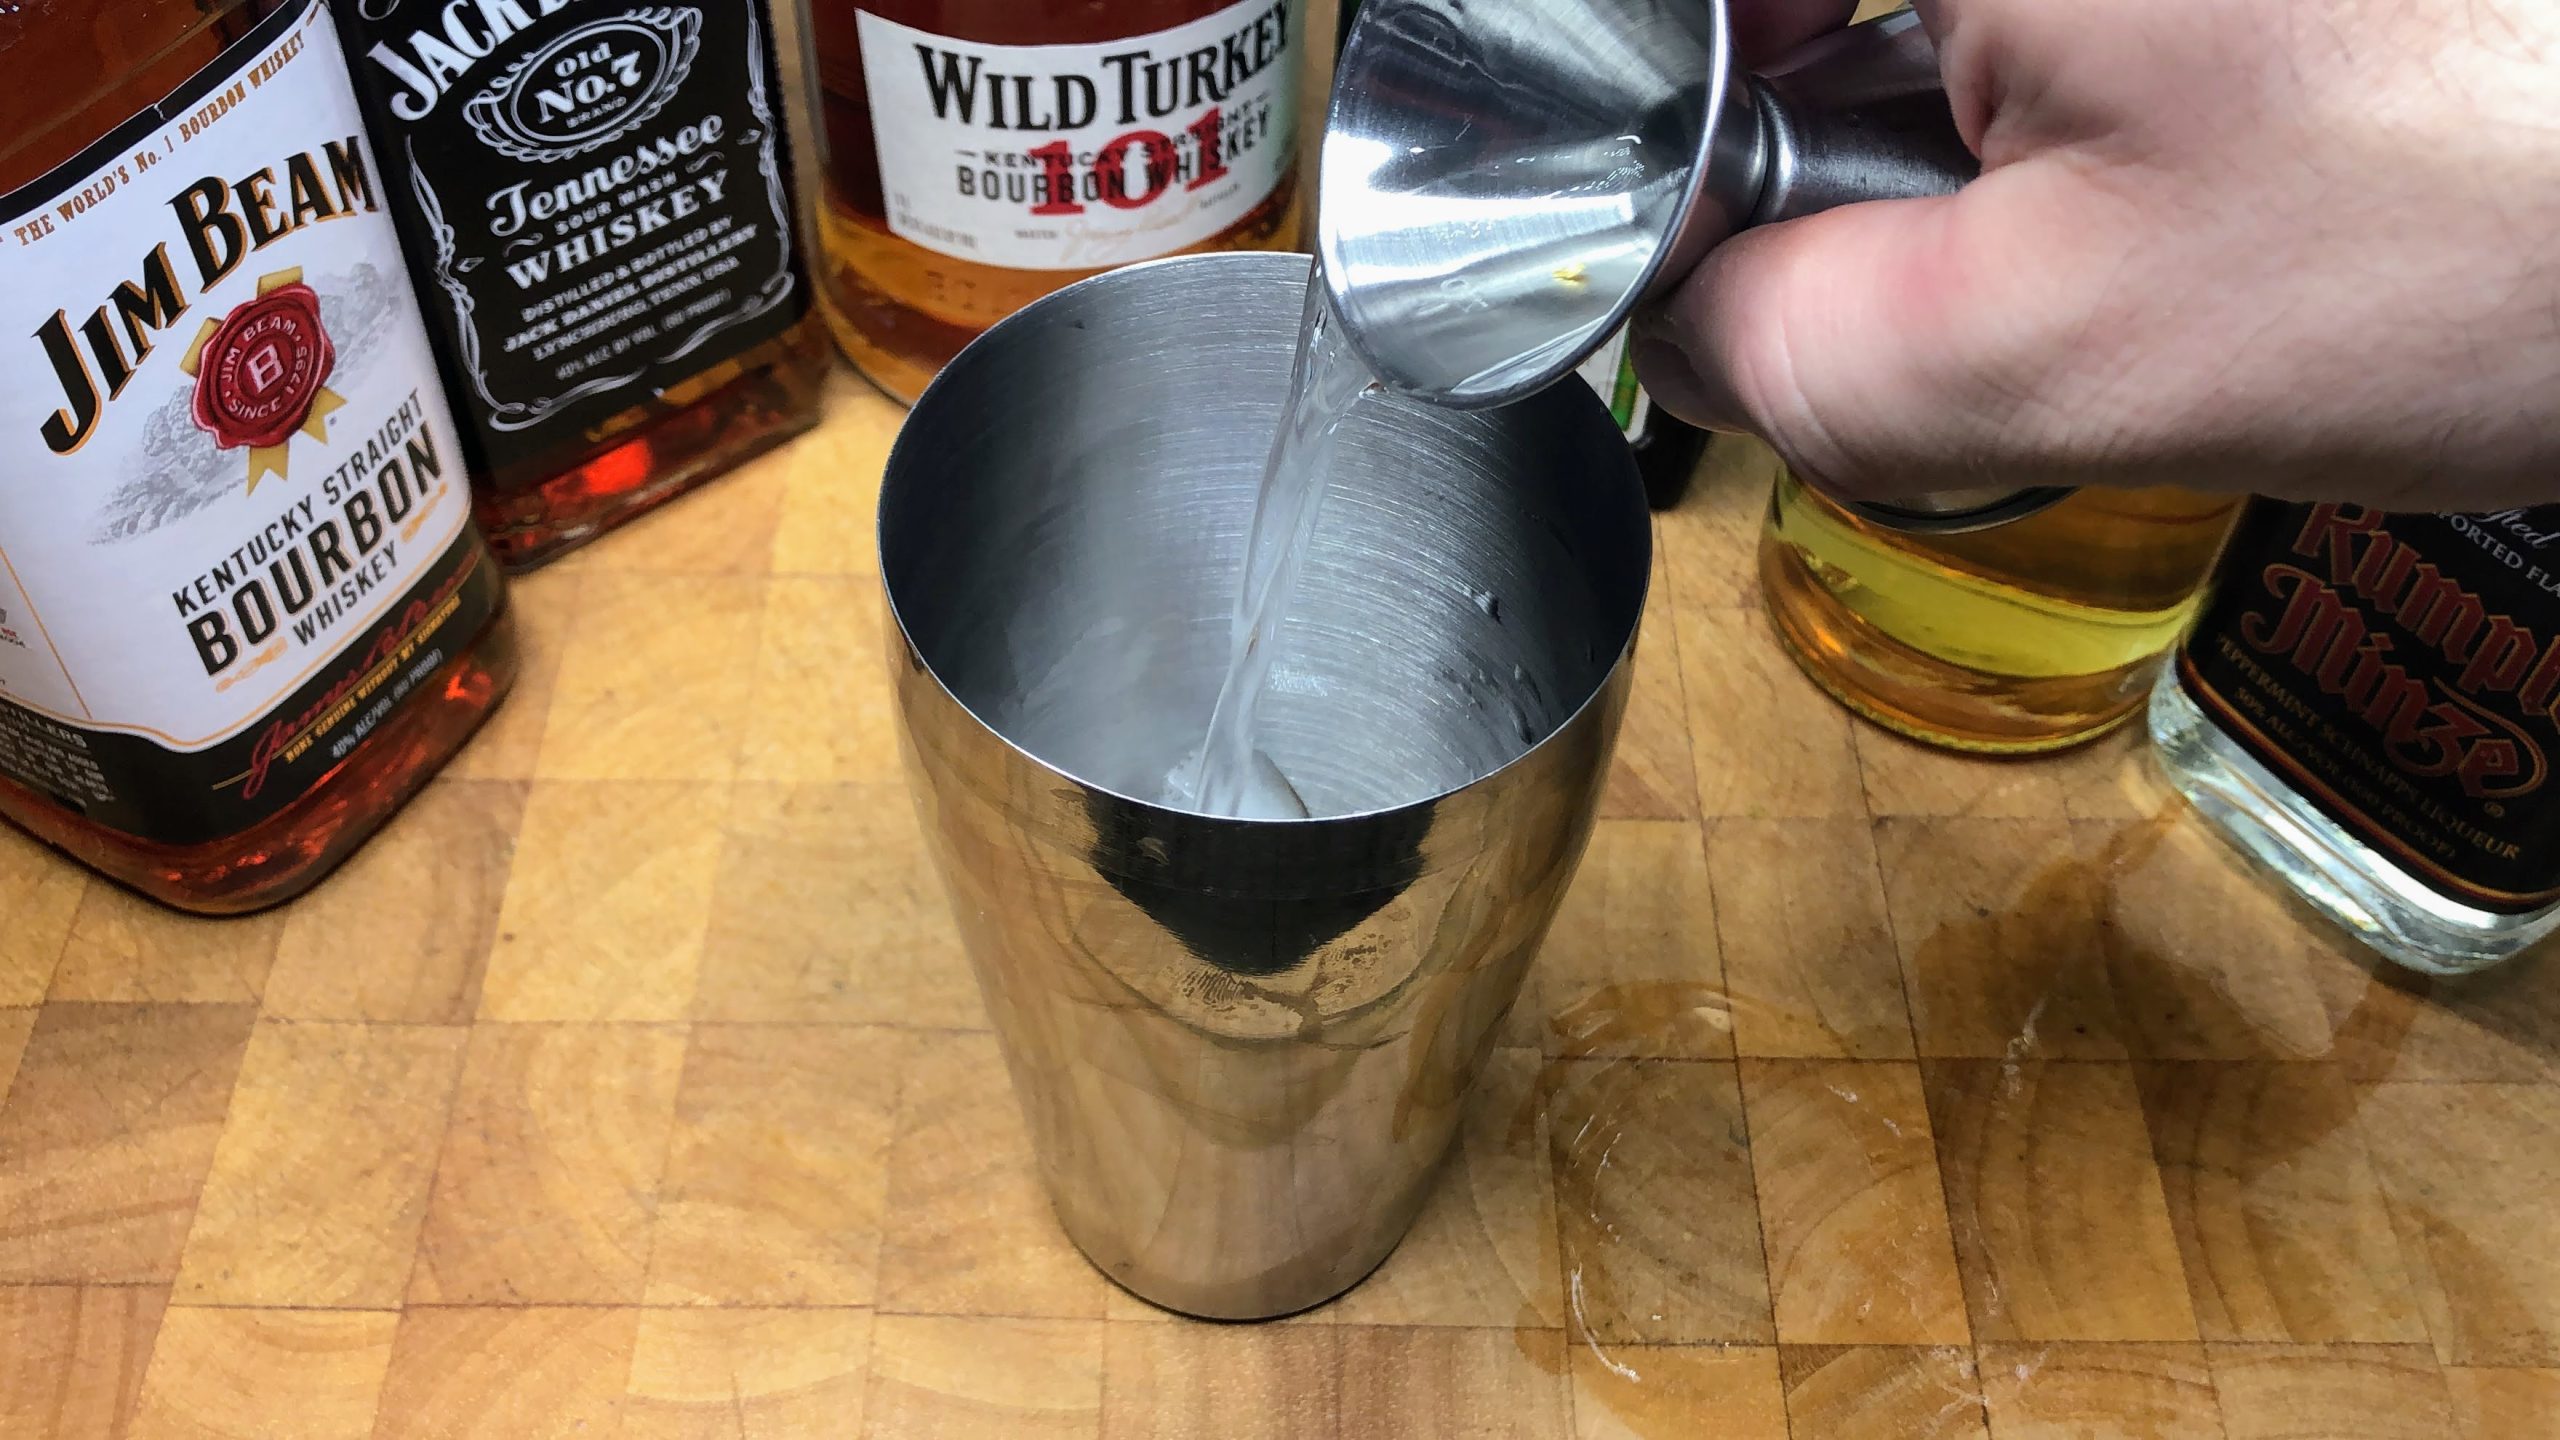 Pouring goldschlager into a shaker